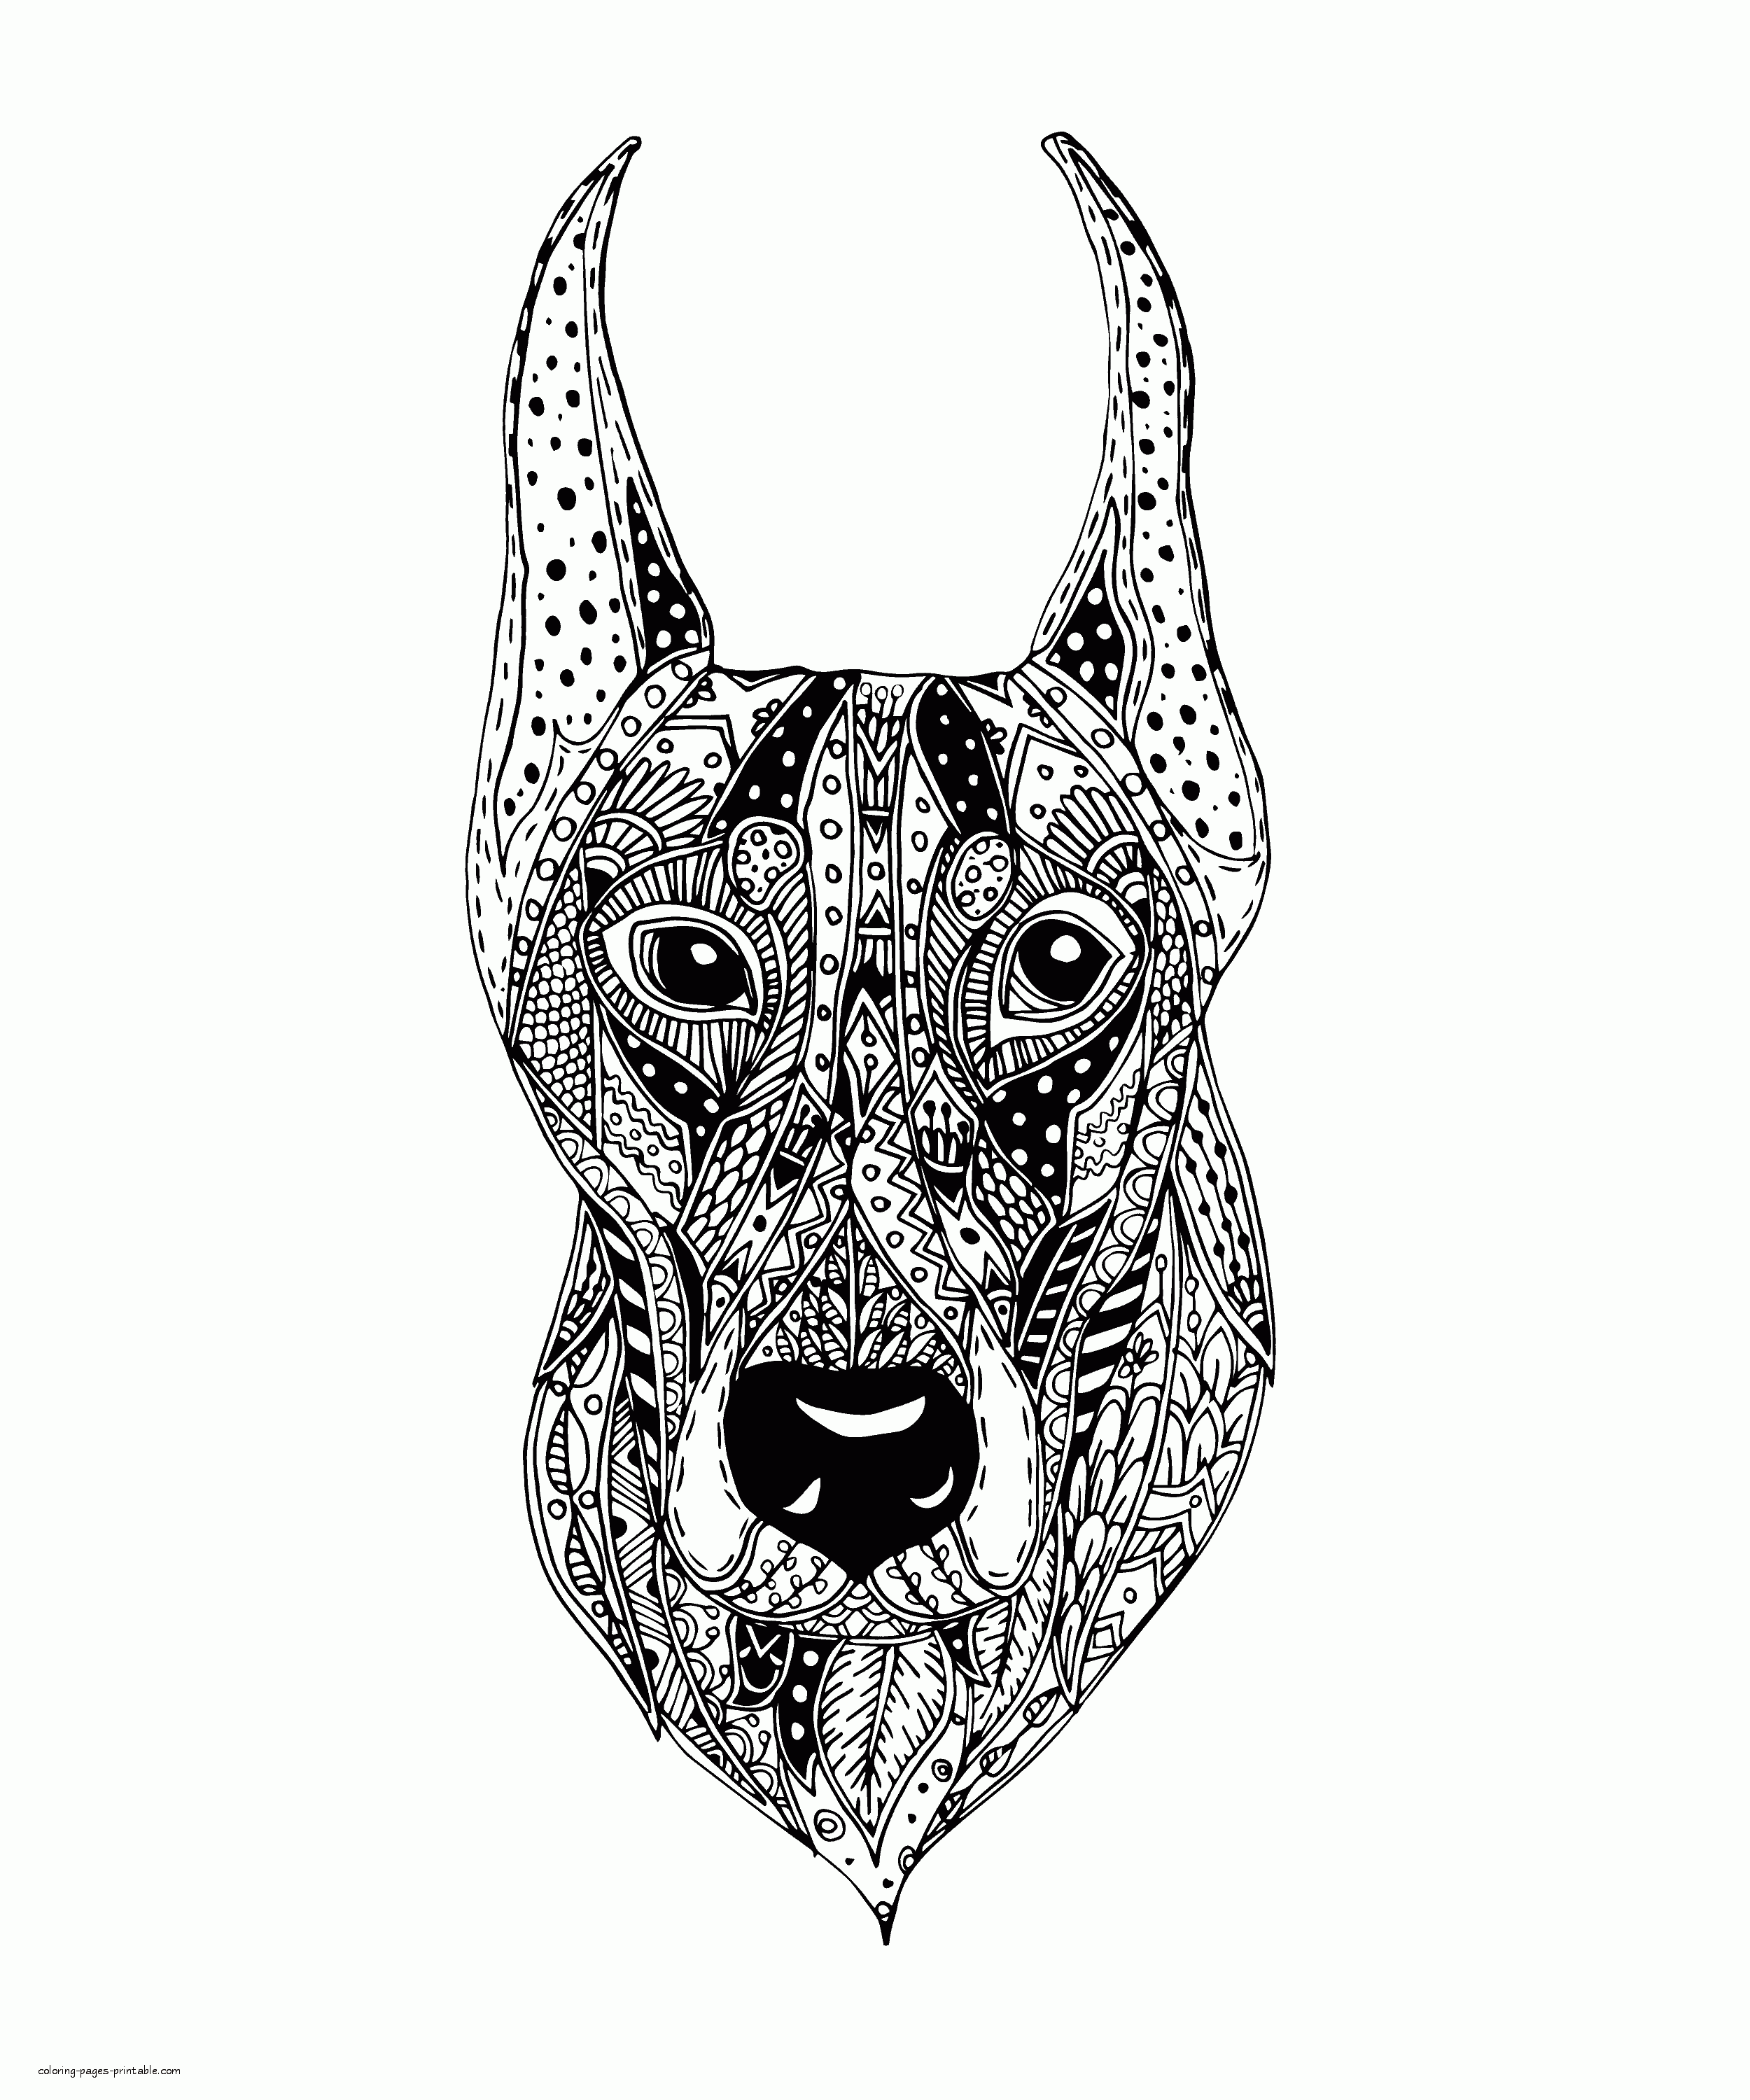 Download Difficult Dog Coloring Page Coloring Pages Printable Com